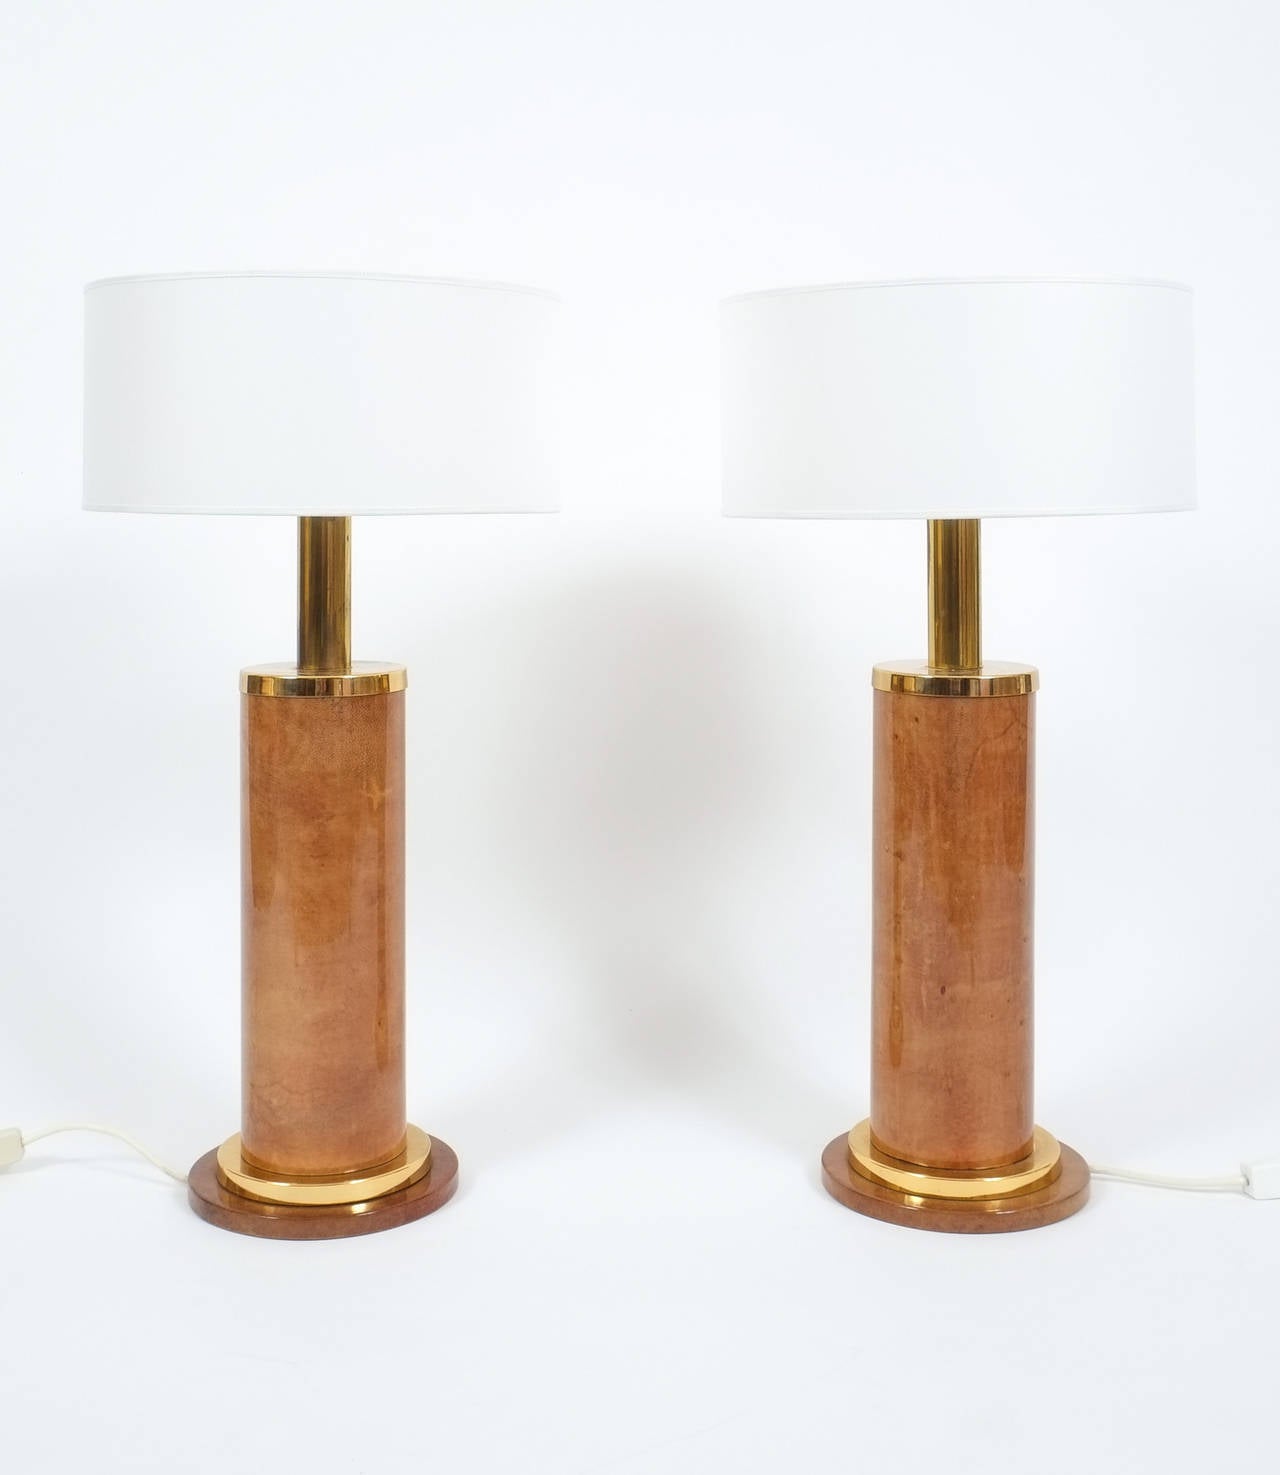 Dyed Aldo Tura Pair of Large Table Lamps Parchment, Italy, circa 1960